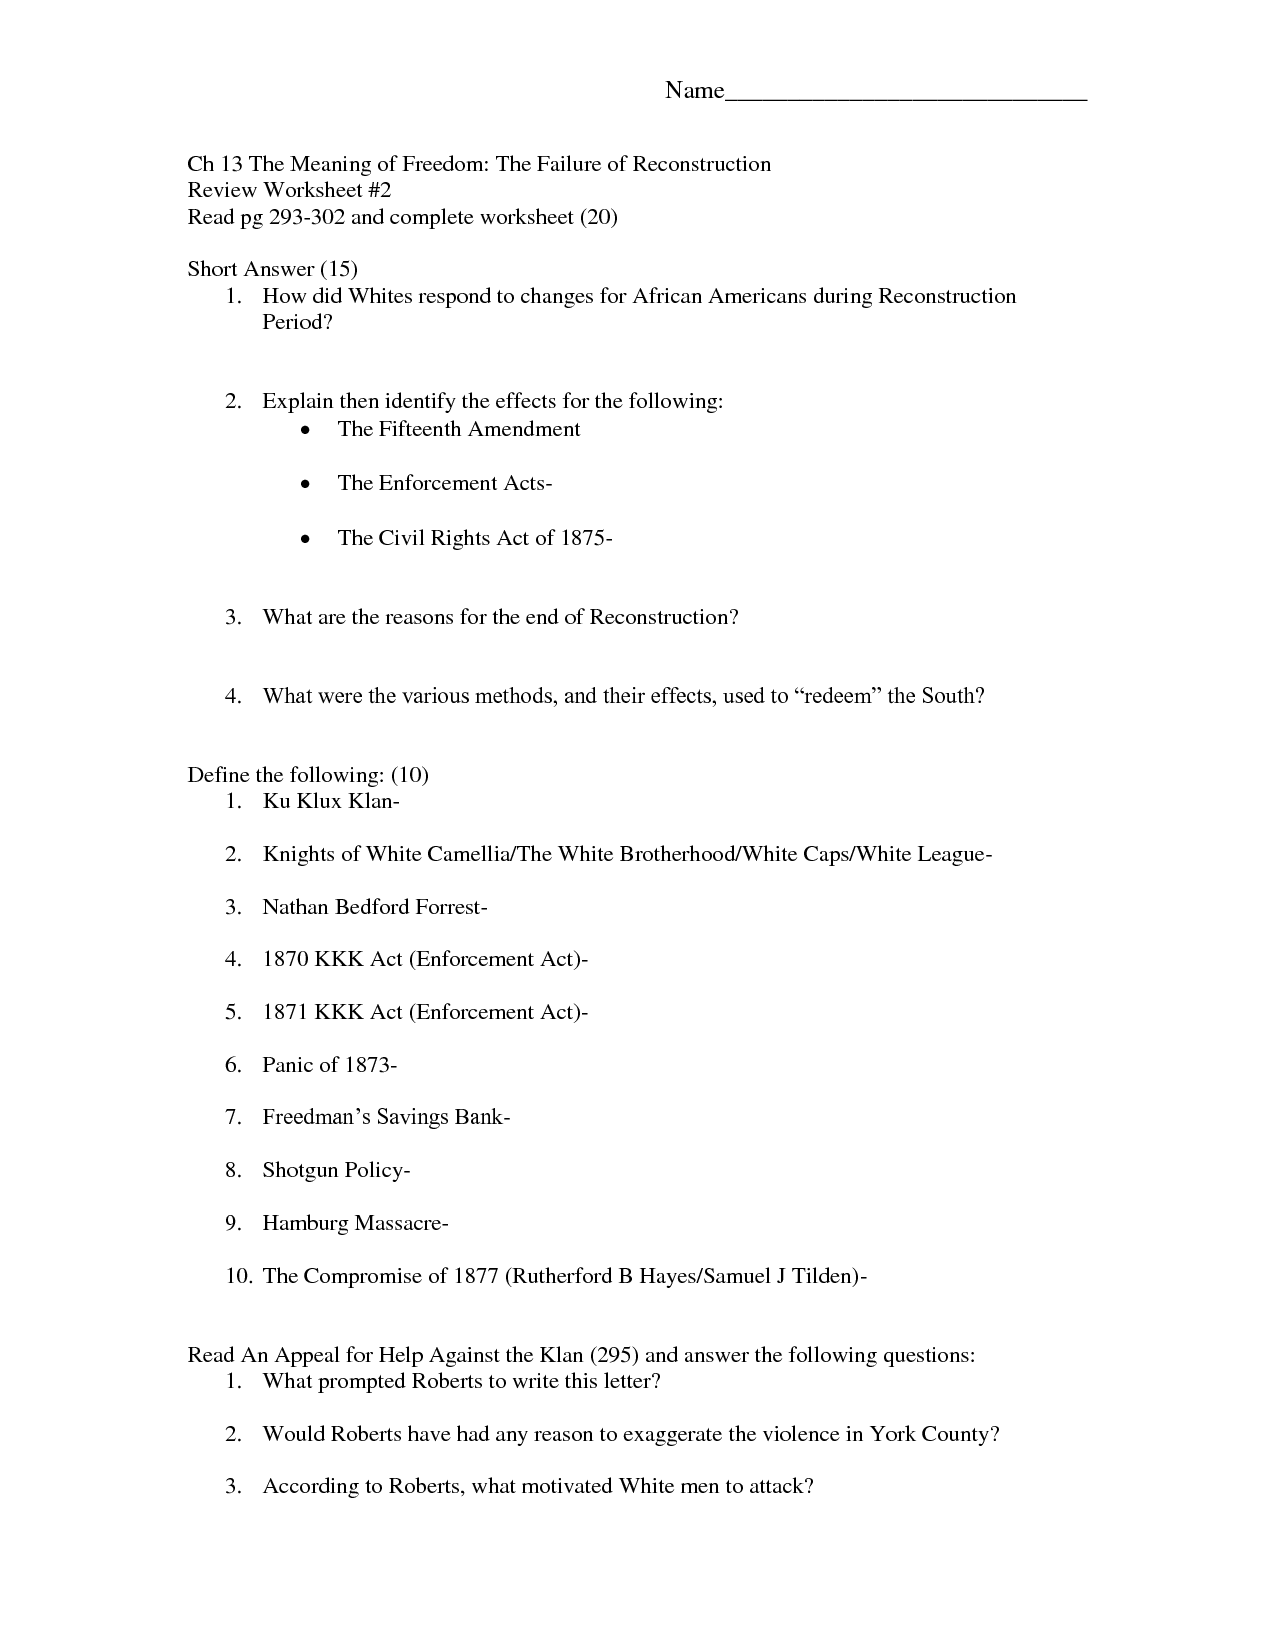 Reconstruction Review Worksheet